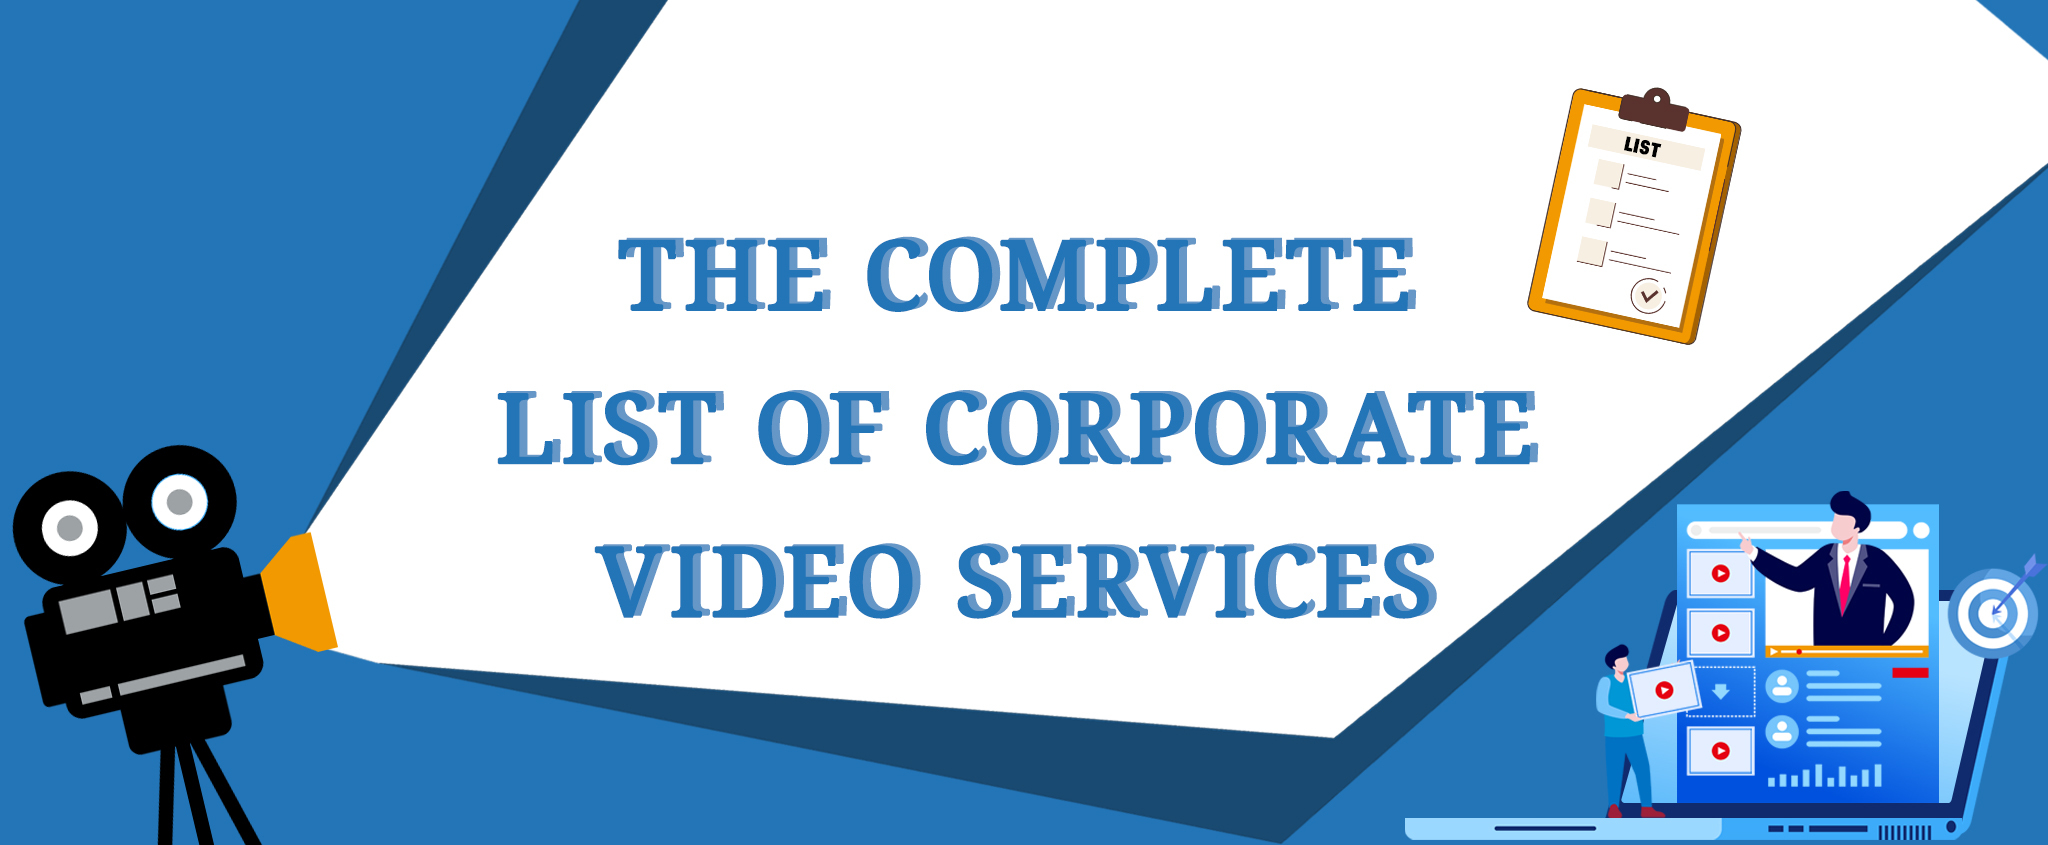 The Complete List of Corporate Video Services